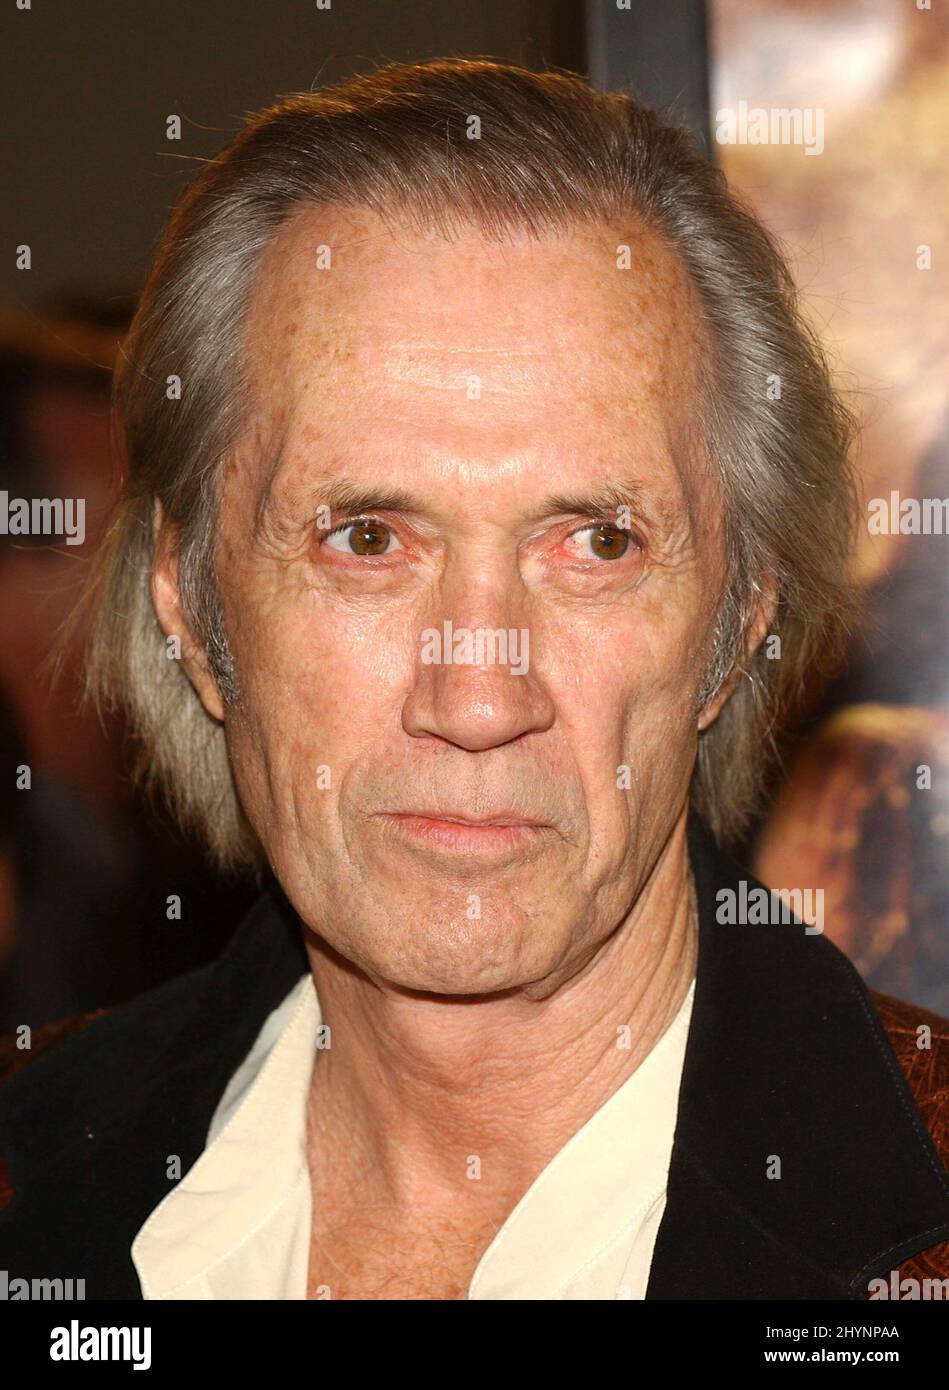 DAVID CARRADINE ATTENDS THE 'LORD OF THE RINGS: THE RETURN OF THE KING' IN WESTWOOD, CALIFORNIA. PICTURE: UK PRESS Stock Photo